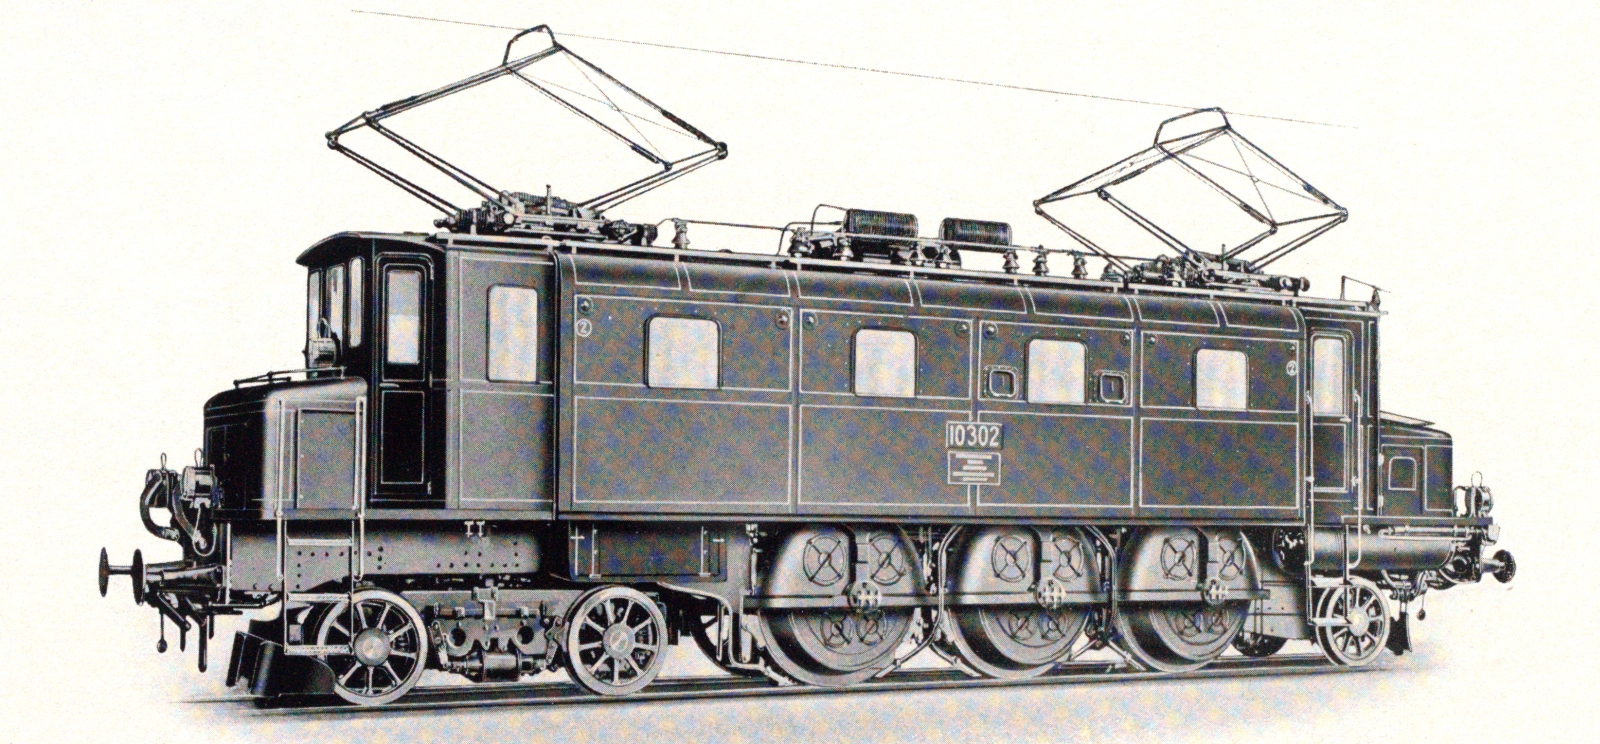 No. 10302 in the SLM data sheet